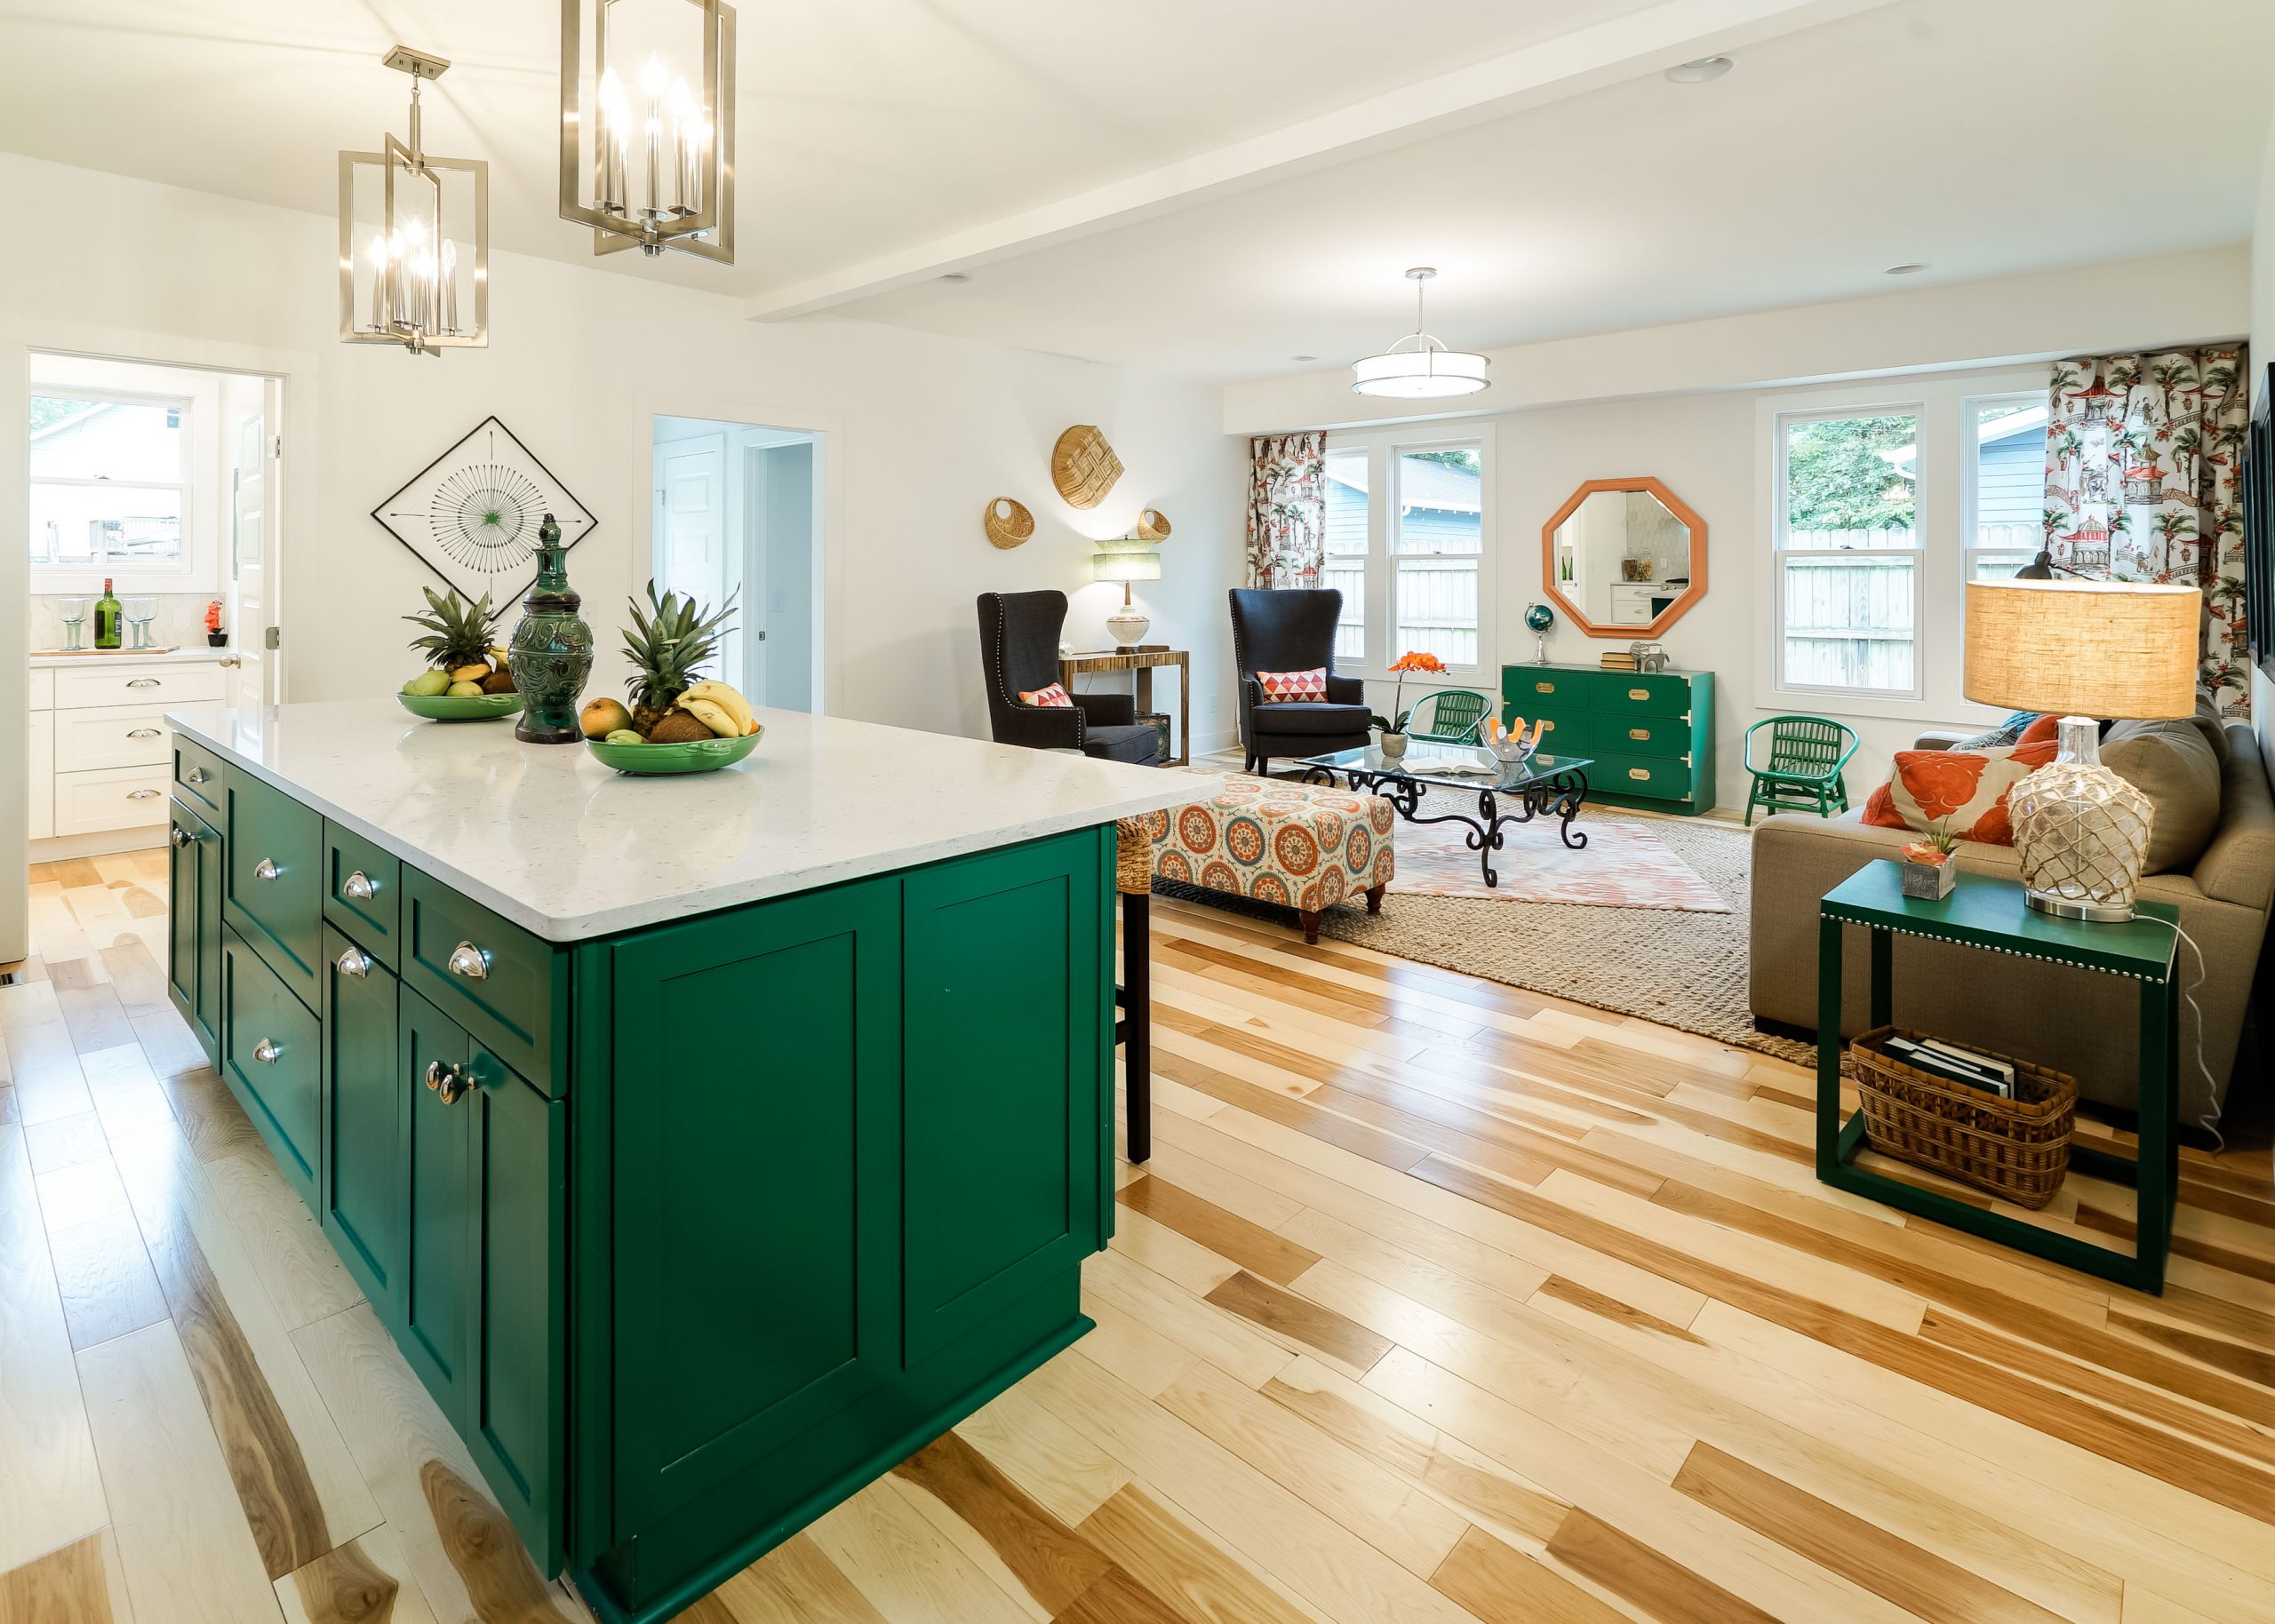 Kortney Wilson designs tropical glam home with hits of green.